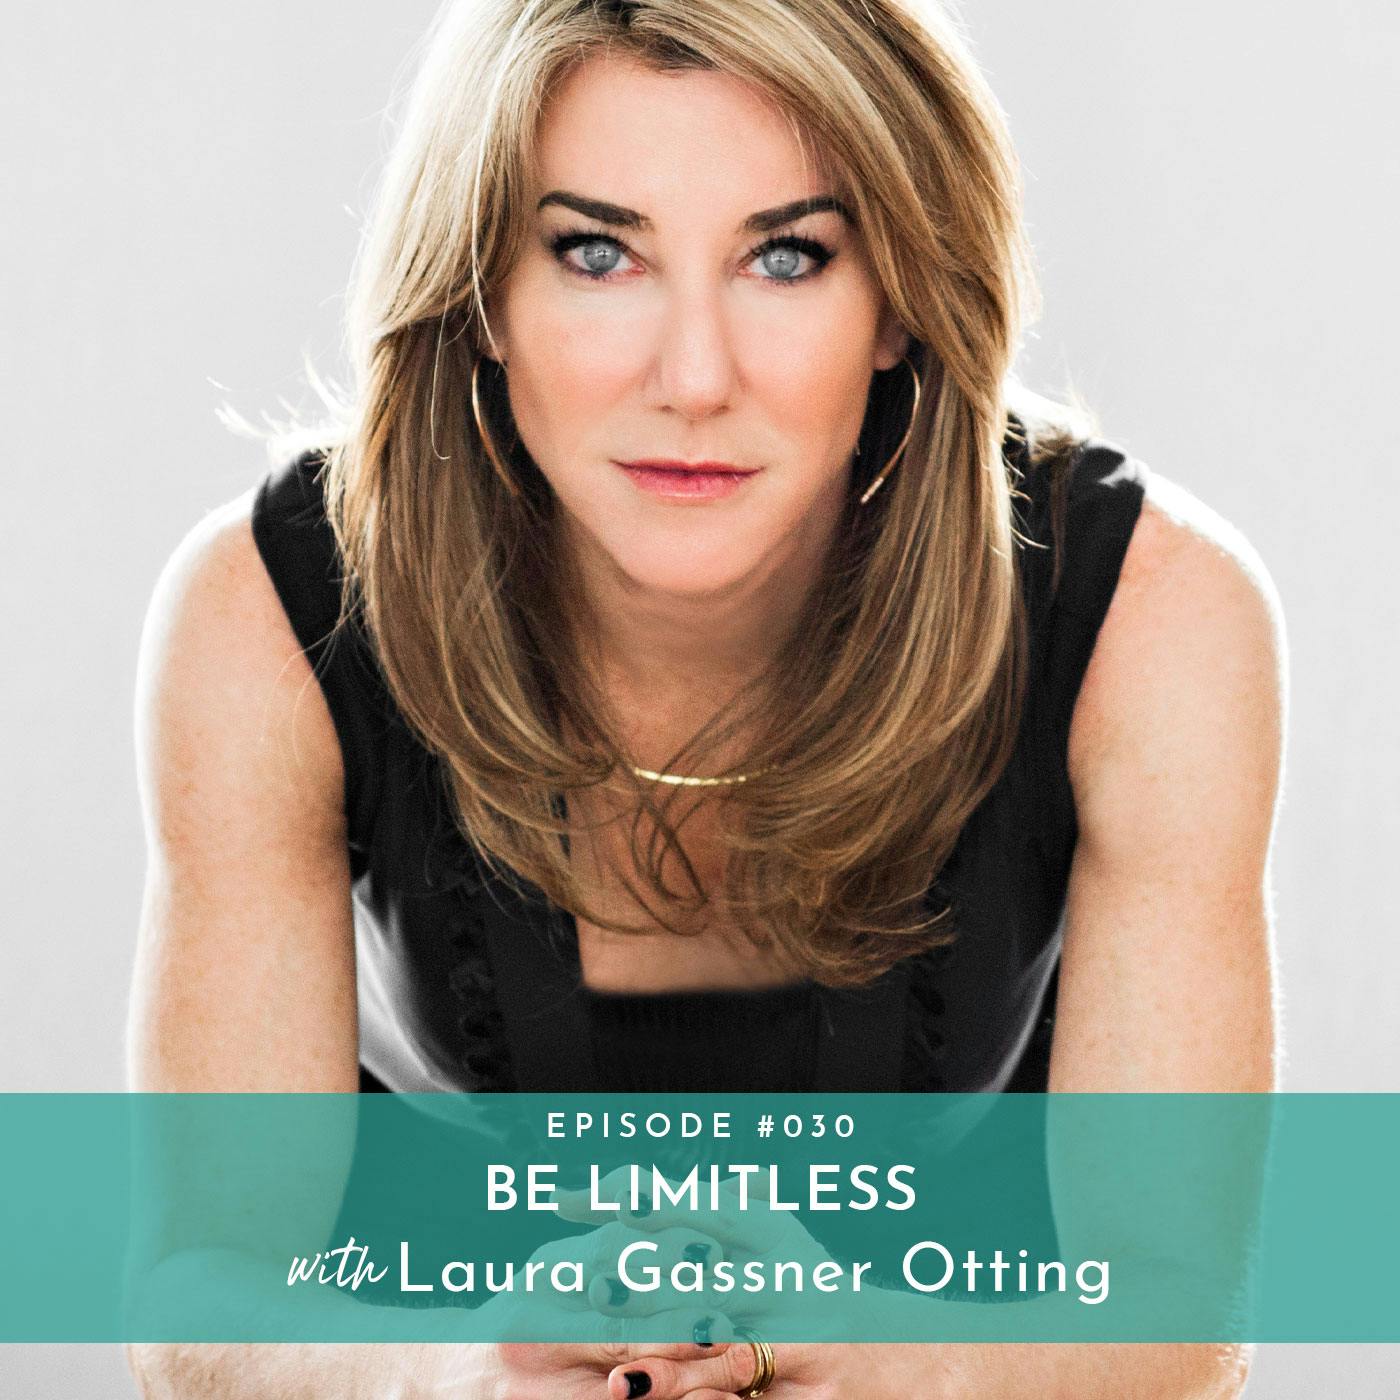 Be Limitless with Laura Gassner Otting